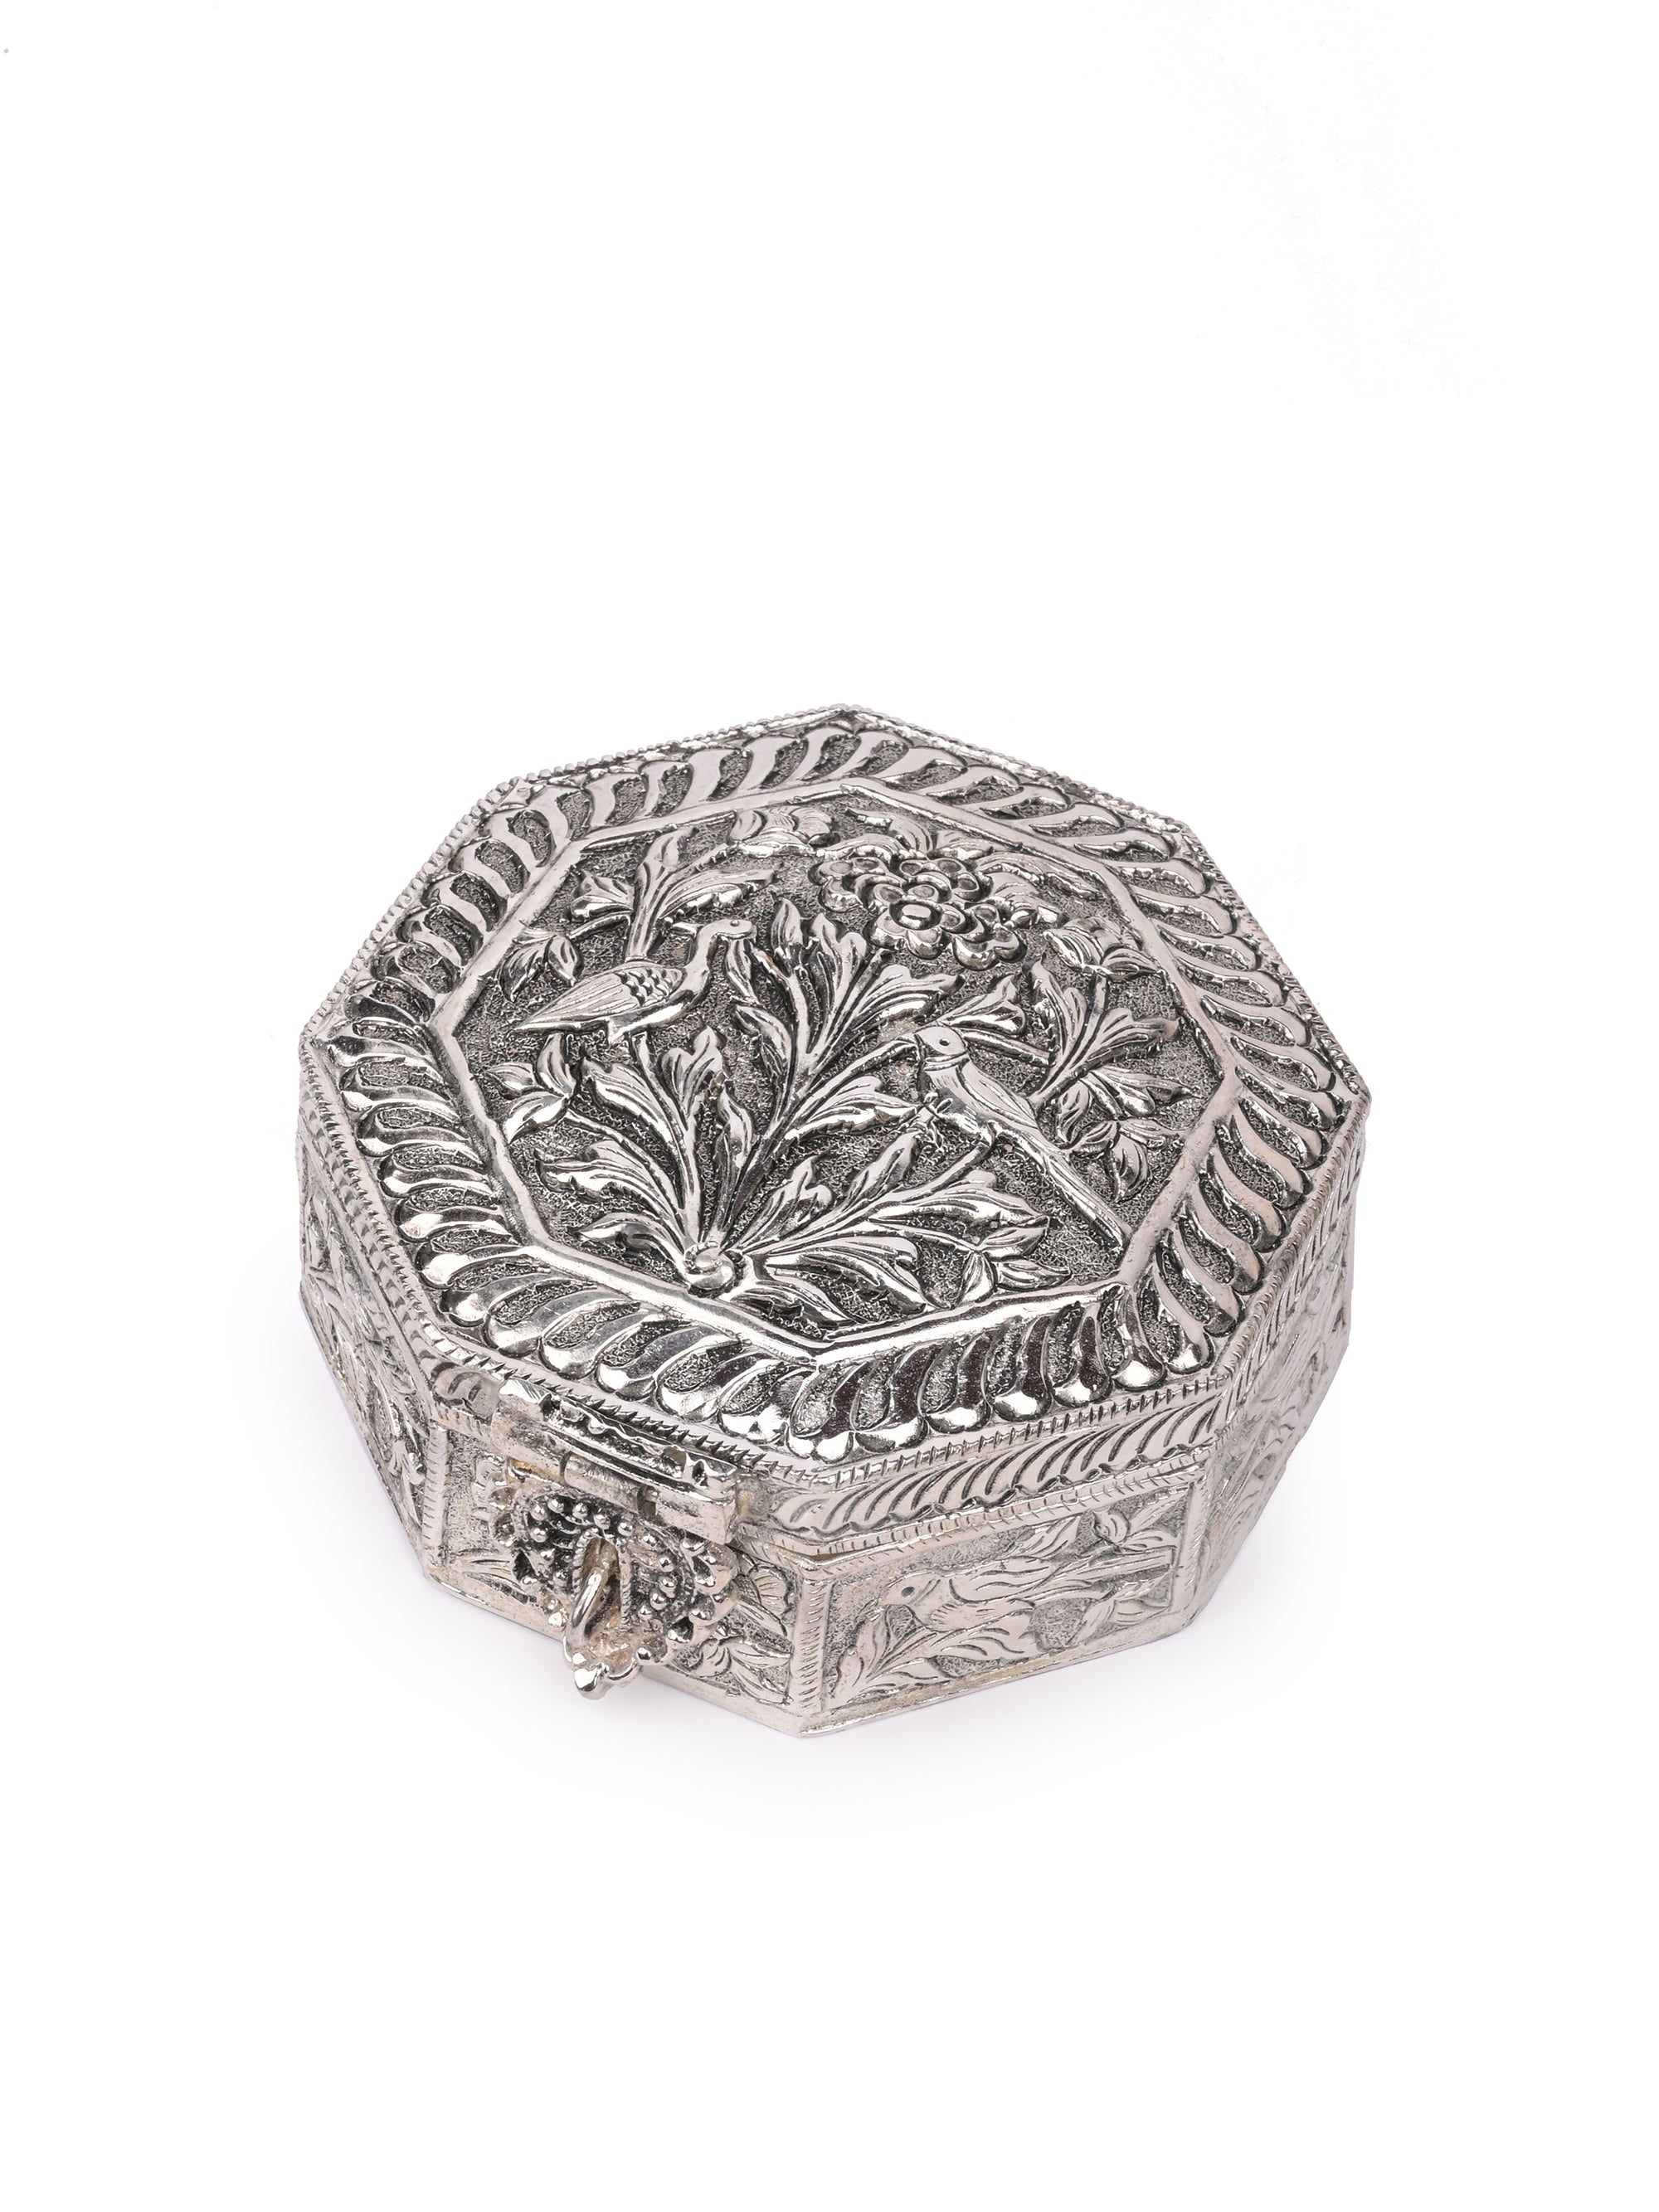 Hand crafted, Silver oxidised, Hexagonal Jewellery / Trinket box - The Heritage Artifacts